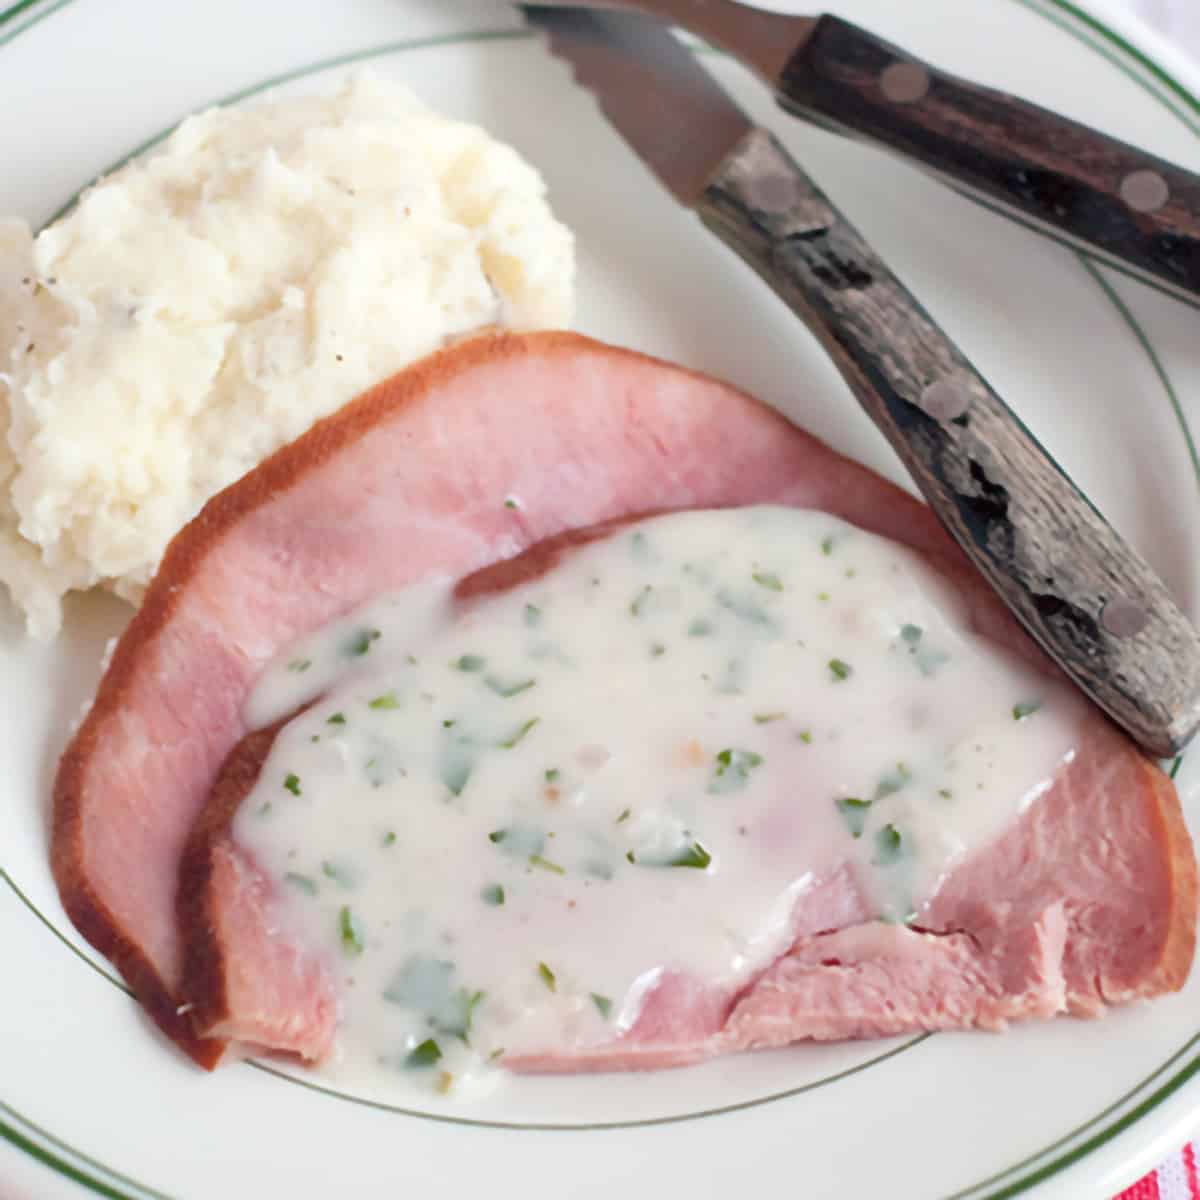 Ham with Creamy Herb Sauce - fully-cooked ham slices warmed and served with a traditional Irish creamy herb sauce. Great choice for your Easter menu. https://www.lanascooking.com/ham-creamy-herb-sauce/